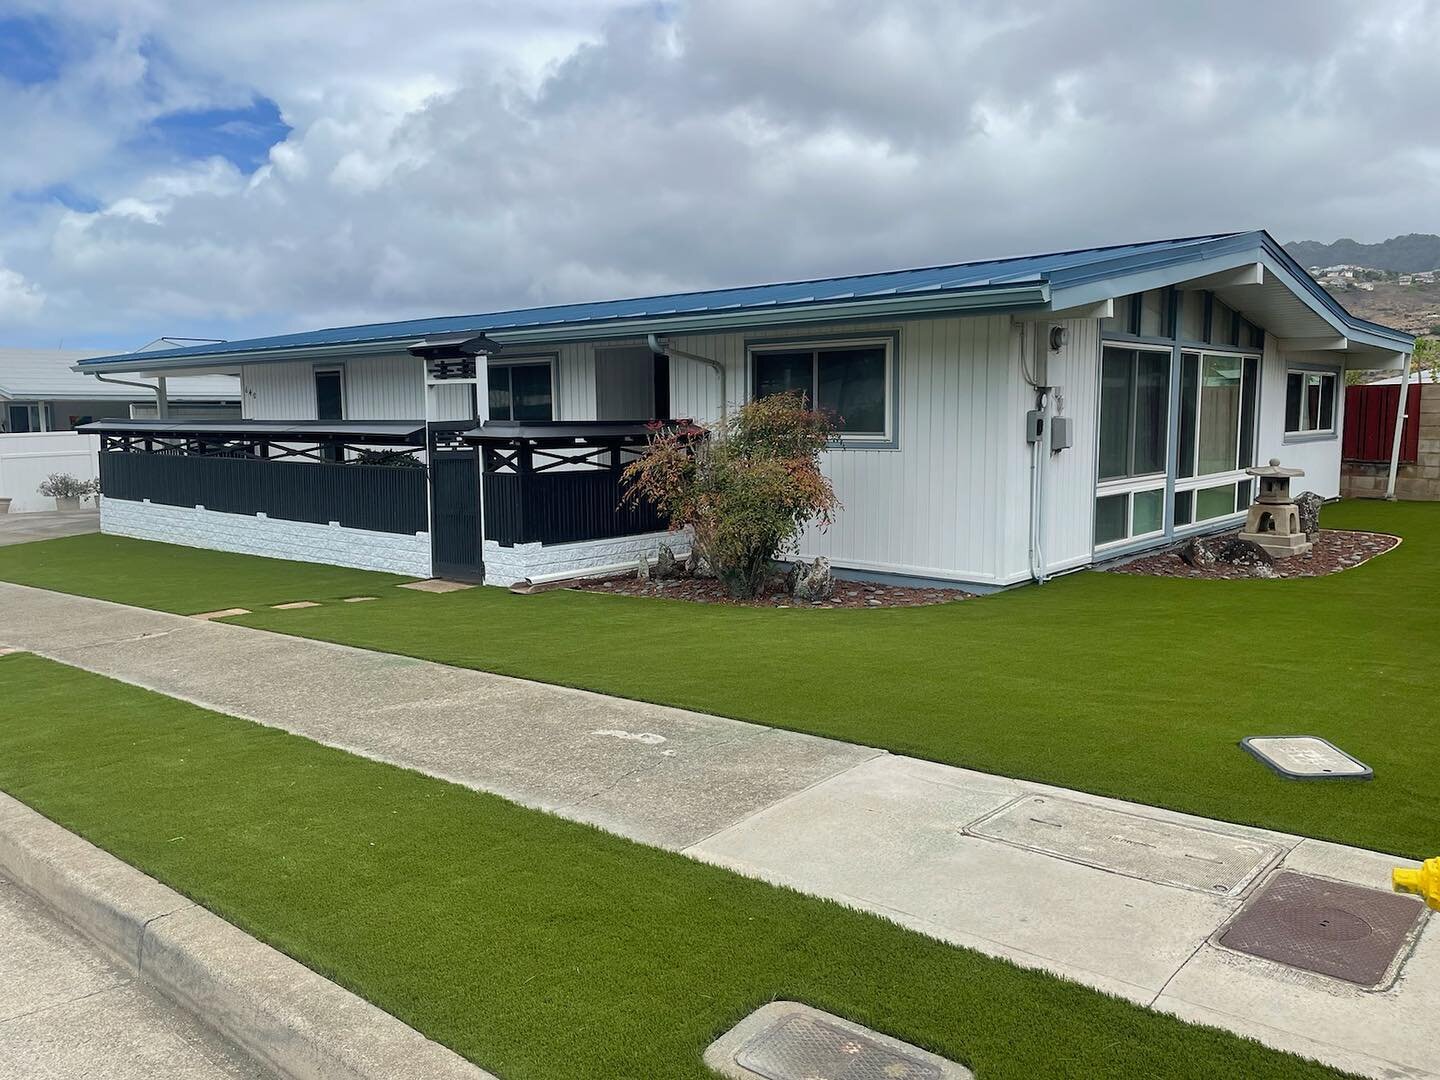 Get your weekends back 🤙🏽 #5931864 #SYNlawnOahu#hawaiilandscaping #SyntheticTurf #ArtificialGrass #Turf #Grass #SynLawn #lifetimewarranty #biobasedproducts #savewater #savetime #getyourweekendsback #alohaeveryday